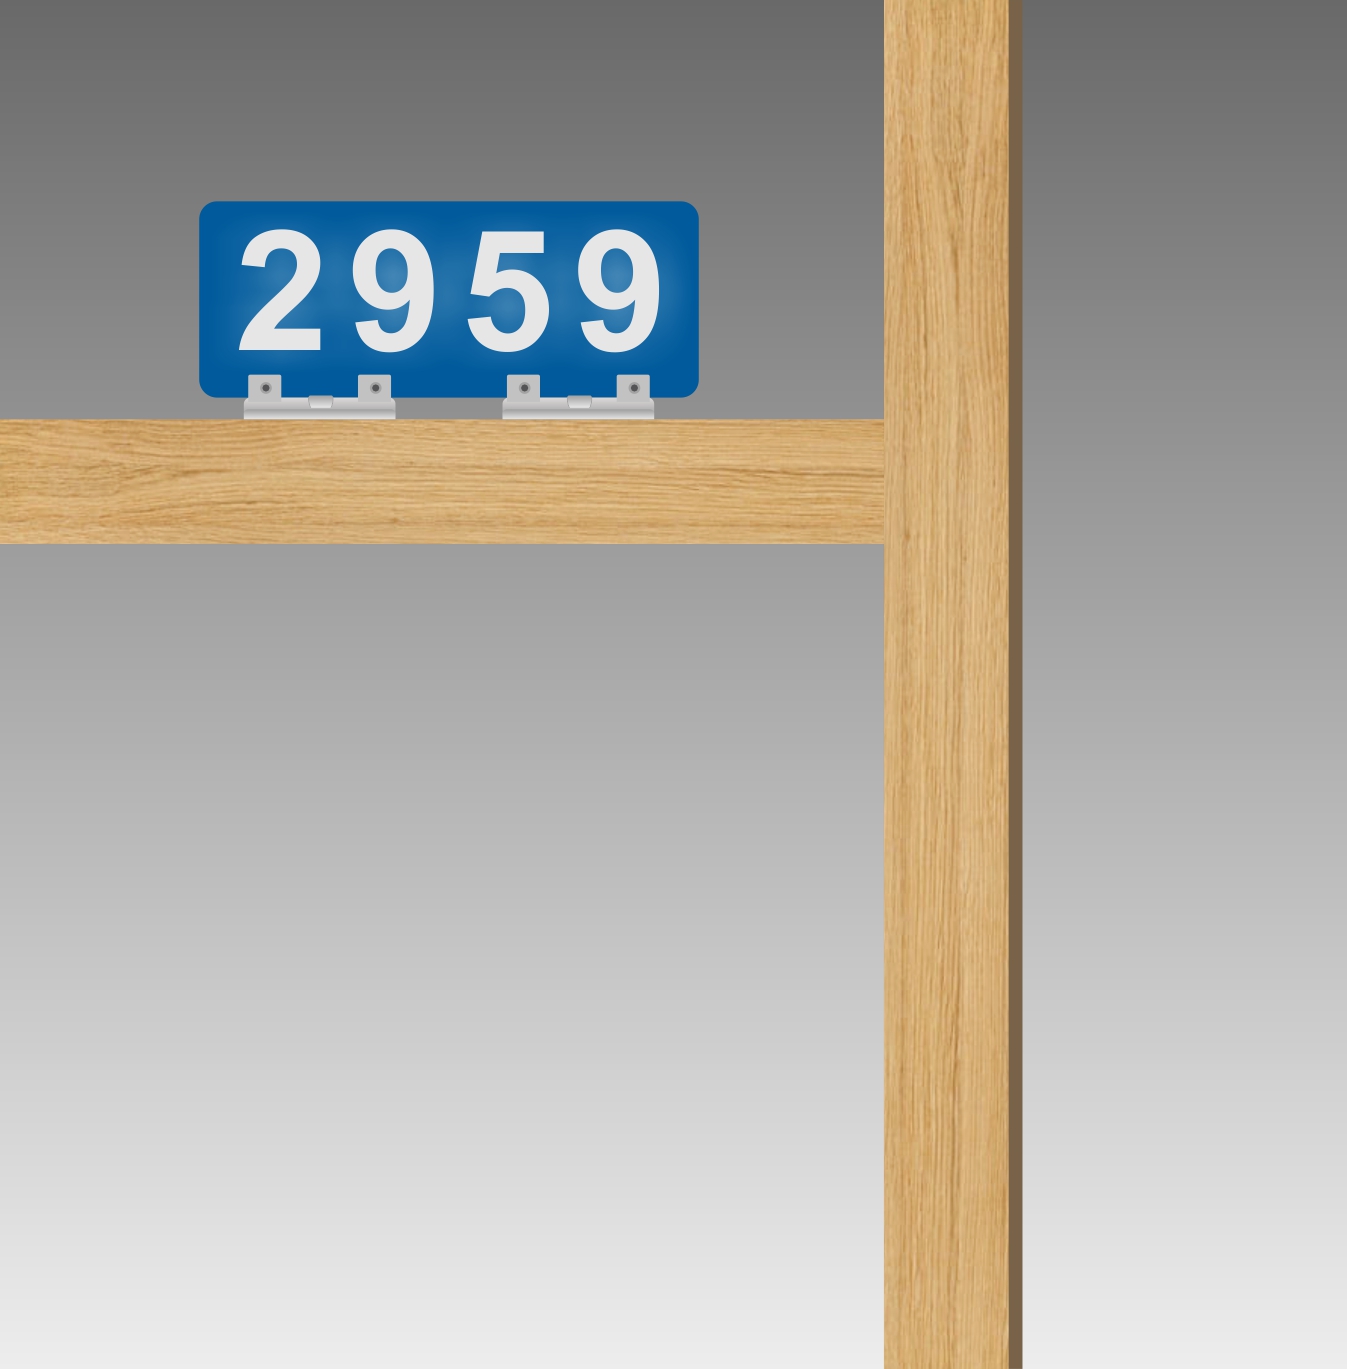 Horizontal Double-Sided Top-Brackets Flag-Style Reflective Address Number Signs